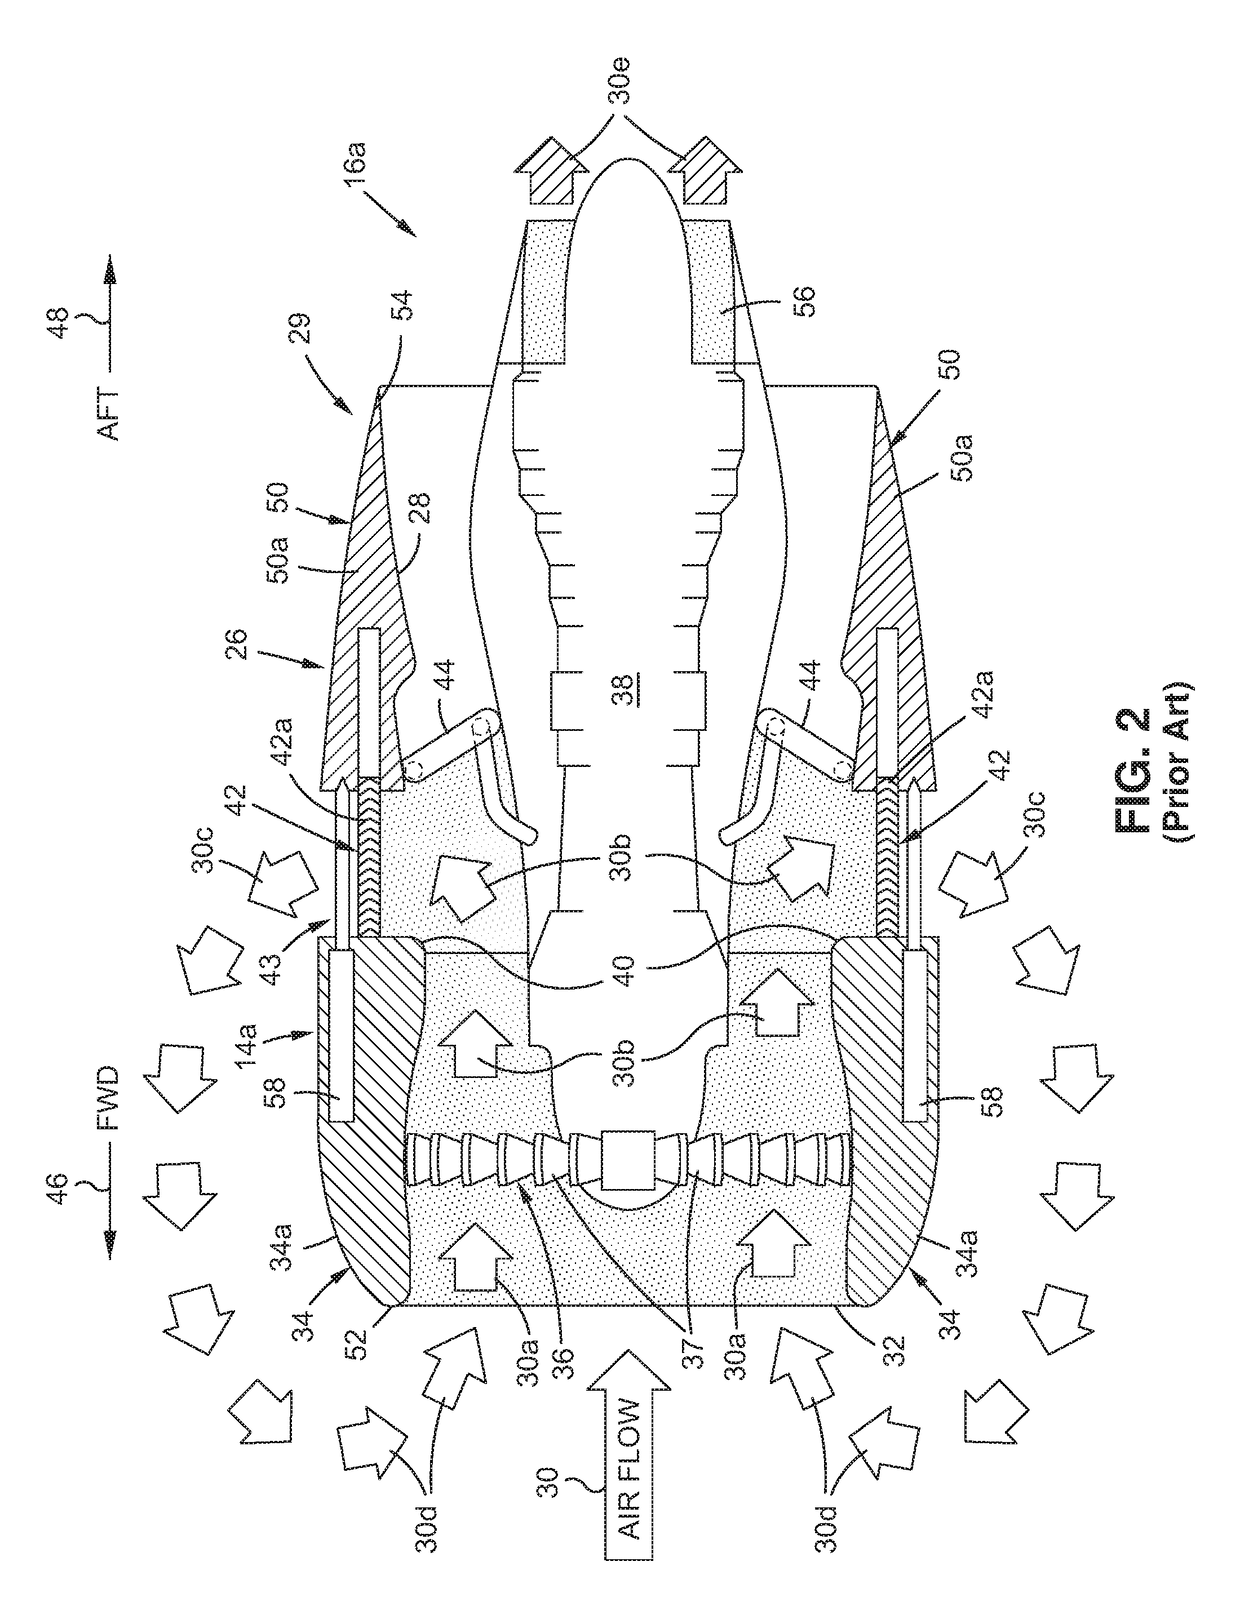 Air flow deflector assembly for a thrust reverser system for reducing re-ingestion of reverse efflux air flow and method for the same